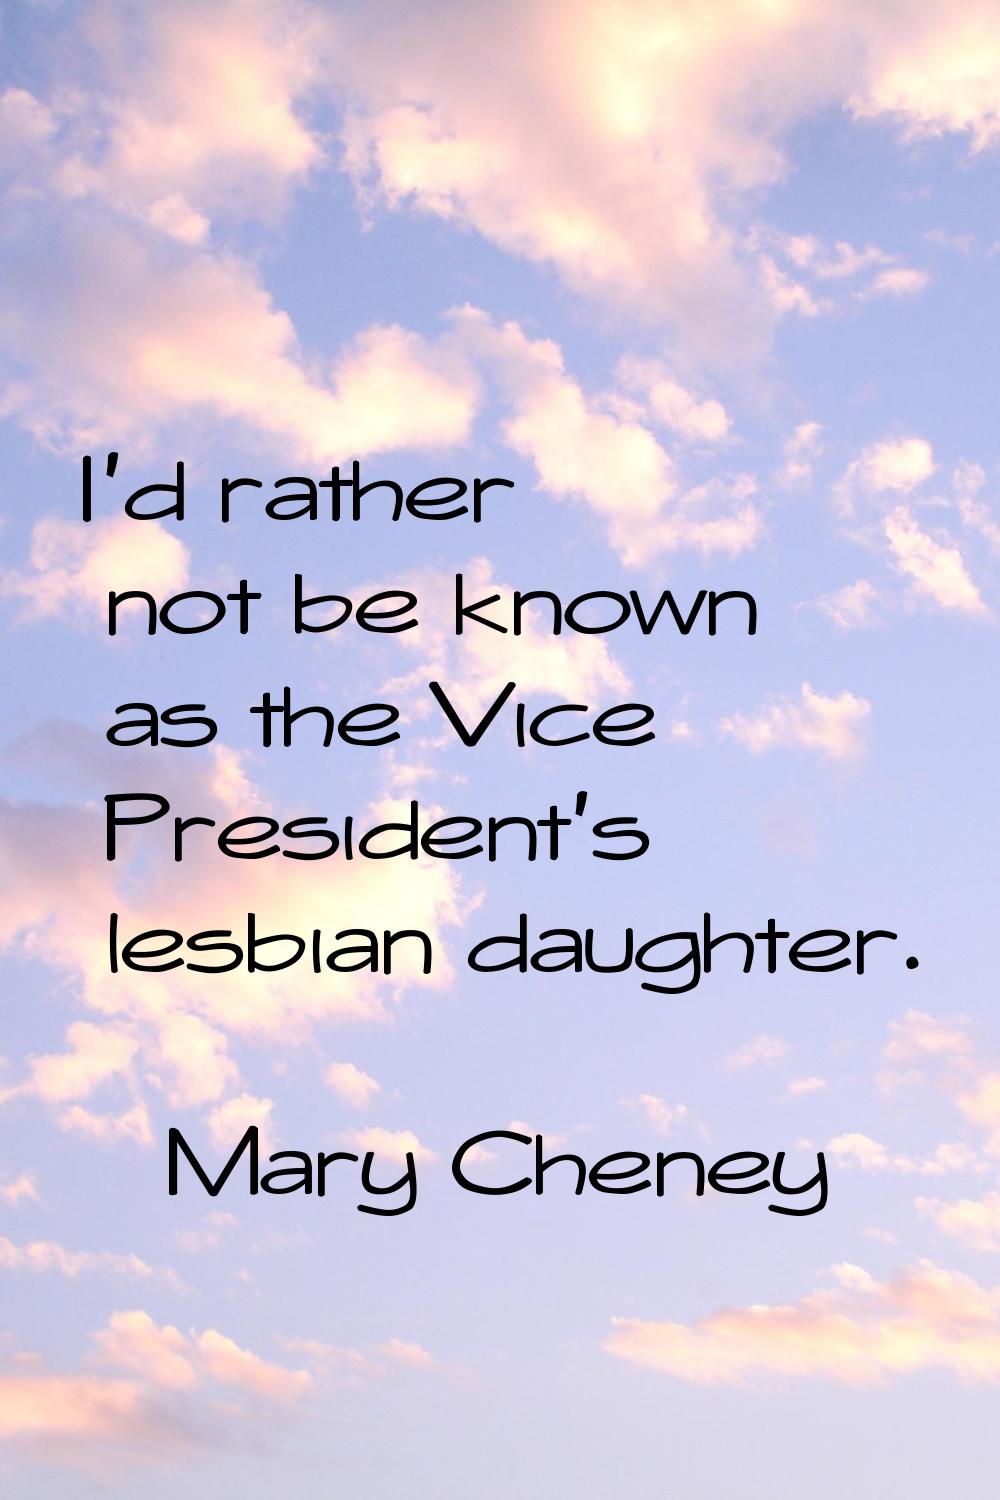 I'd rather not be known as the Vice President's lesbian daughter.